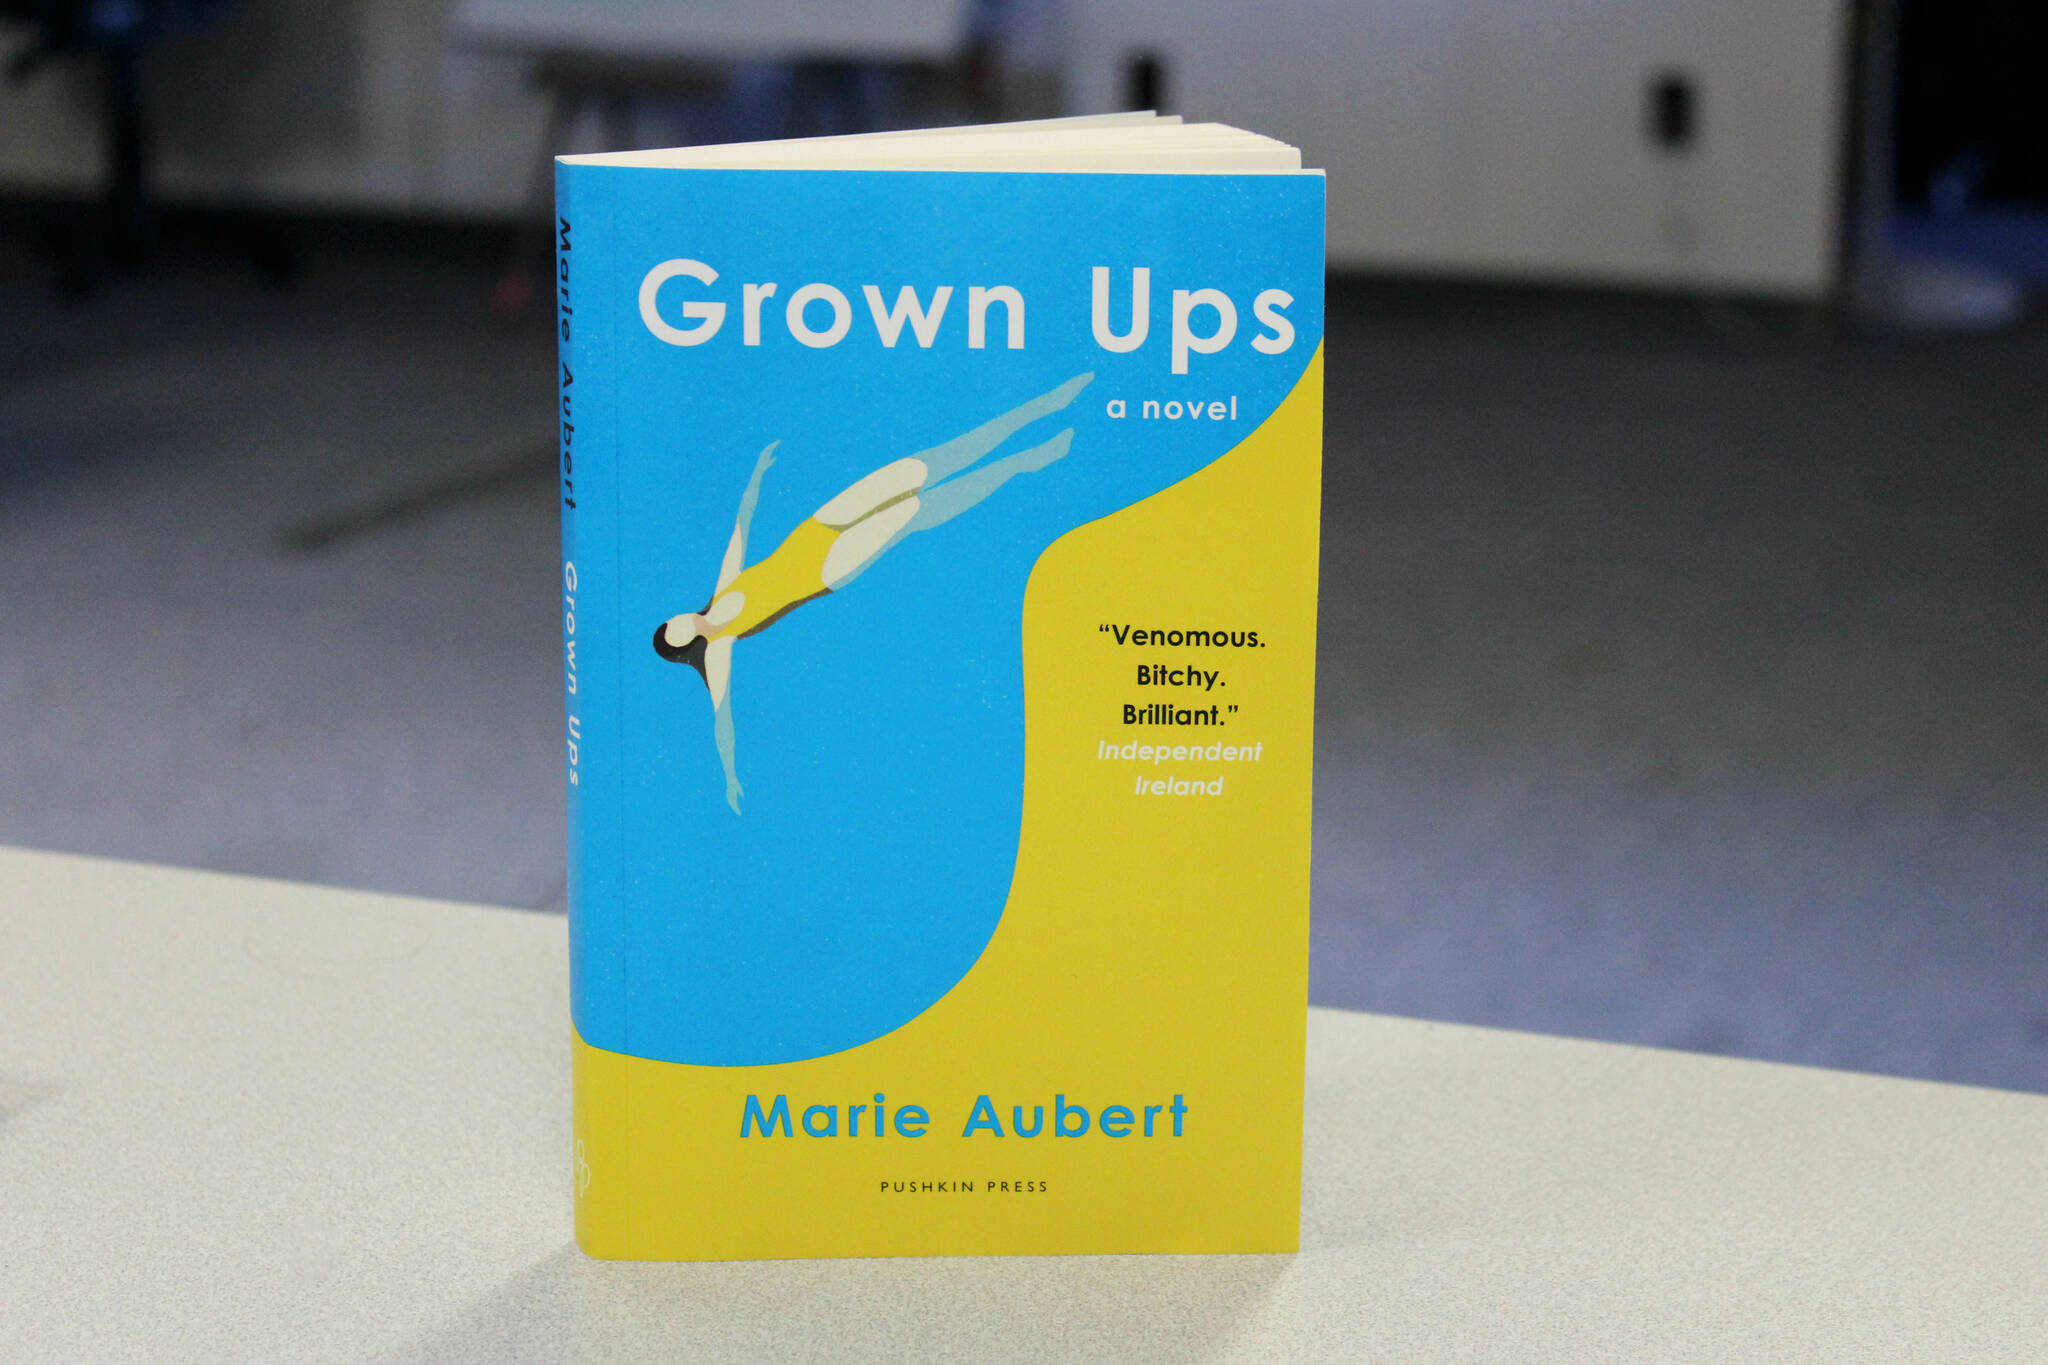 Ashlyn O’Hara/Peninsula Clarion 
A copy of Marie Aubert’s “Grown Ups” sits on a desk in The Peninsula Clarion building on Wednesday in Kenai.